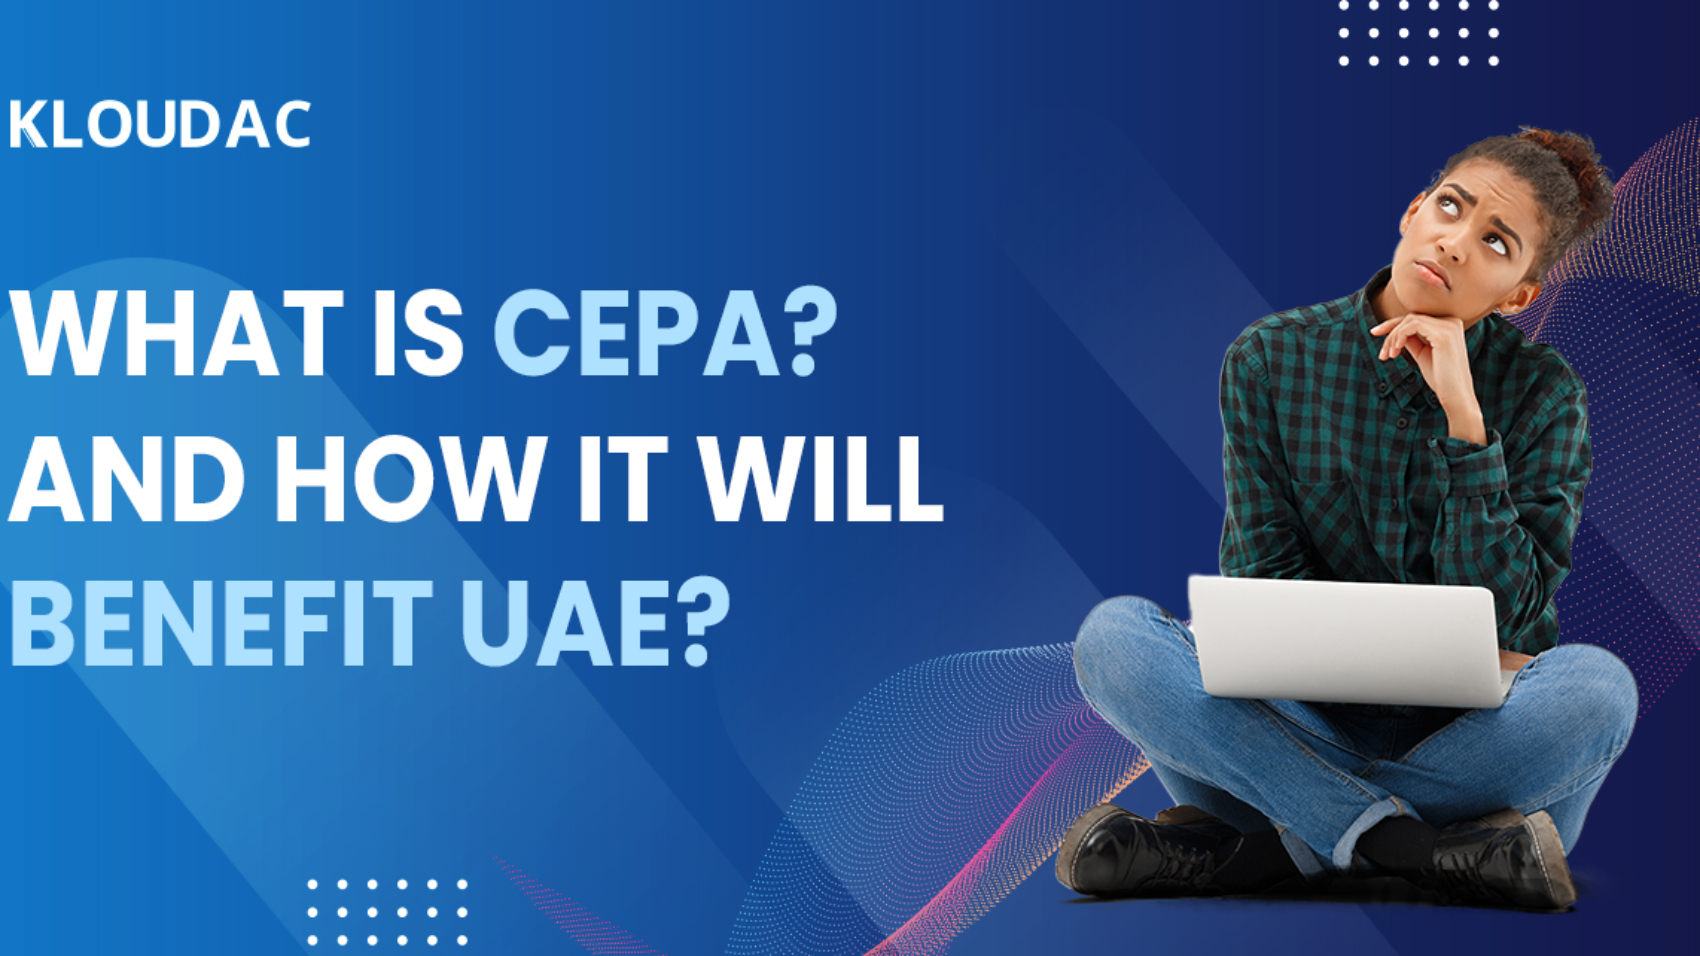 What is CEPA? And how it will benefit UAE?